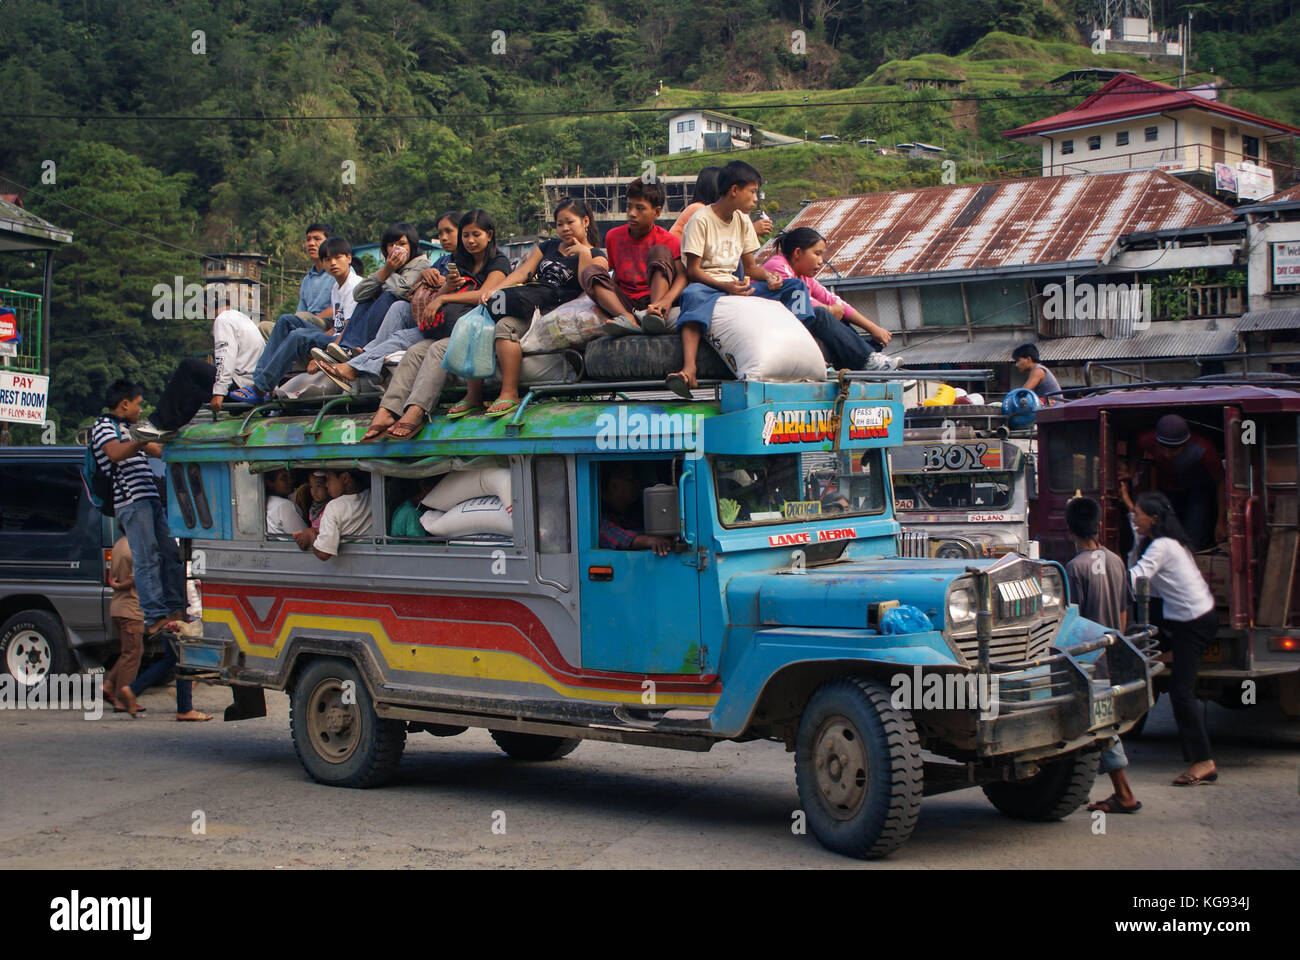 Banaue, Philippines - June 17, 2009: Typical Jeepney overloaded with passengers near Banaue, North Luzon, Philippines. Jeepneys are both cheap public  Stock Photo